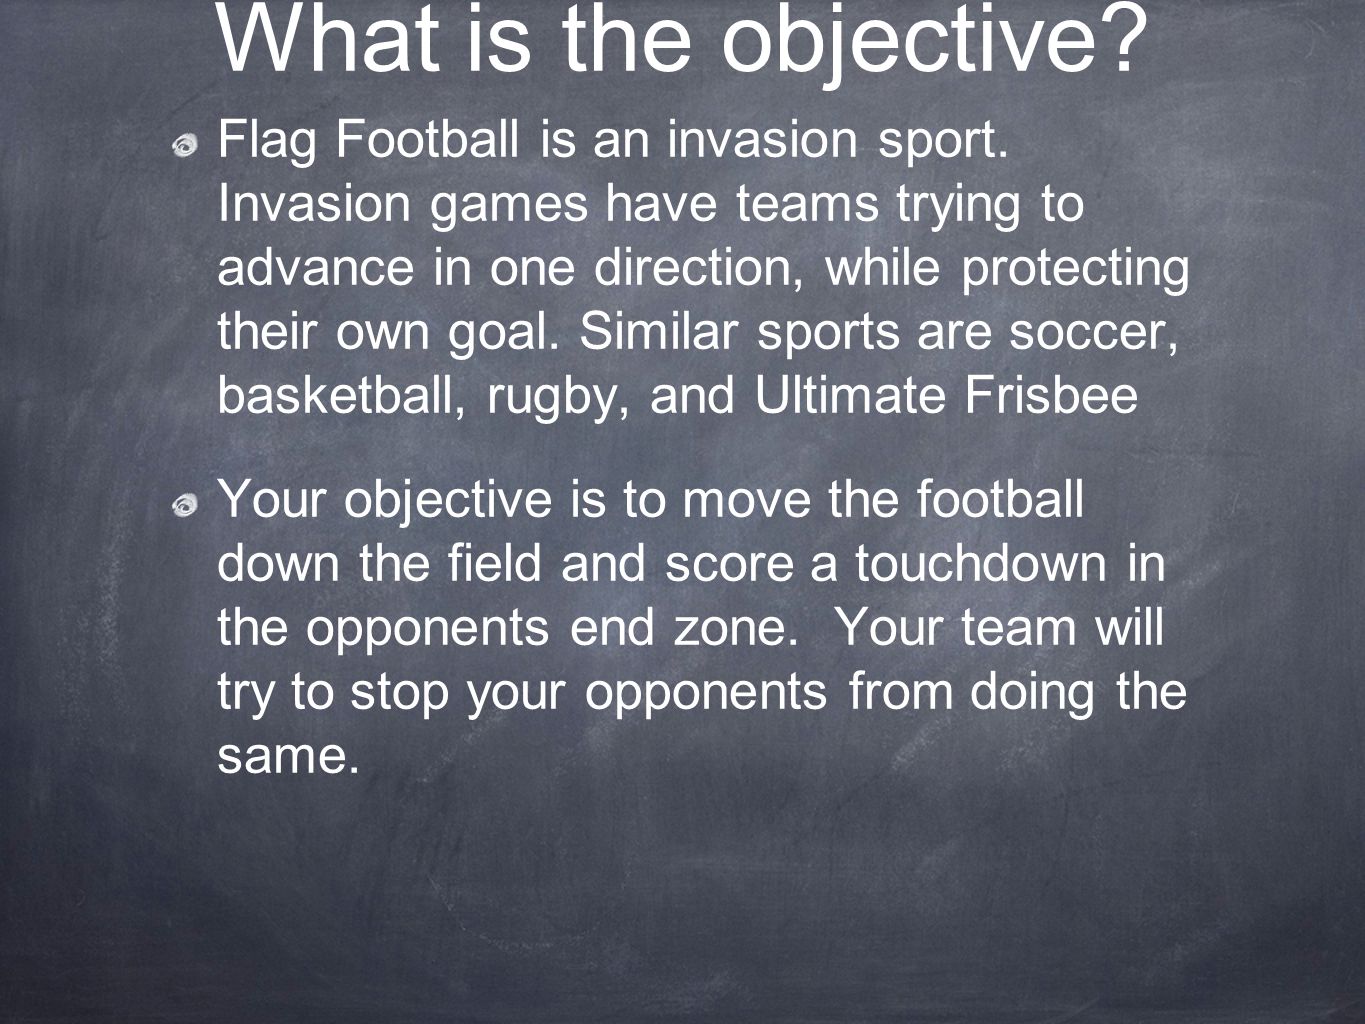 What is the objective